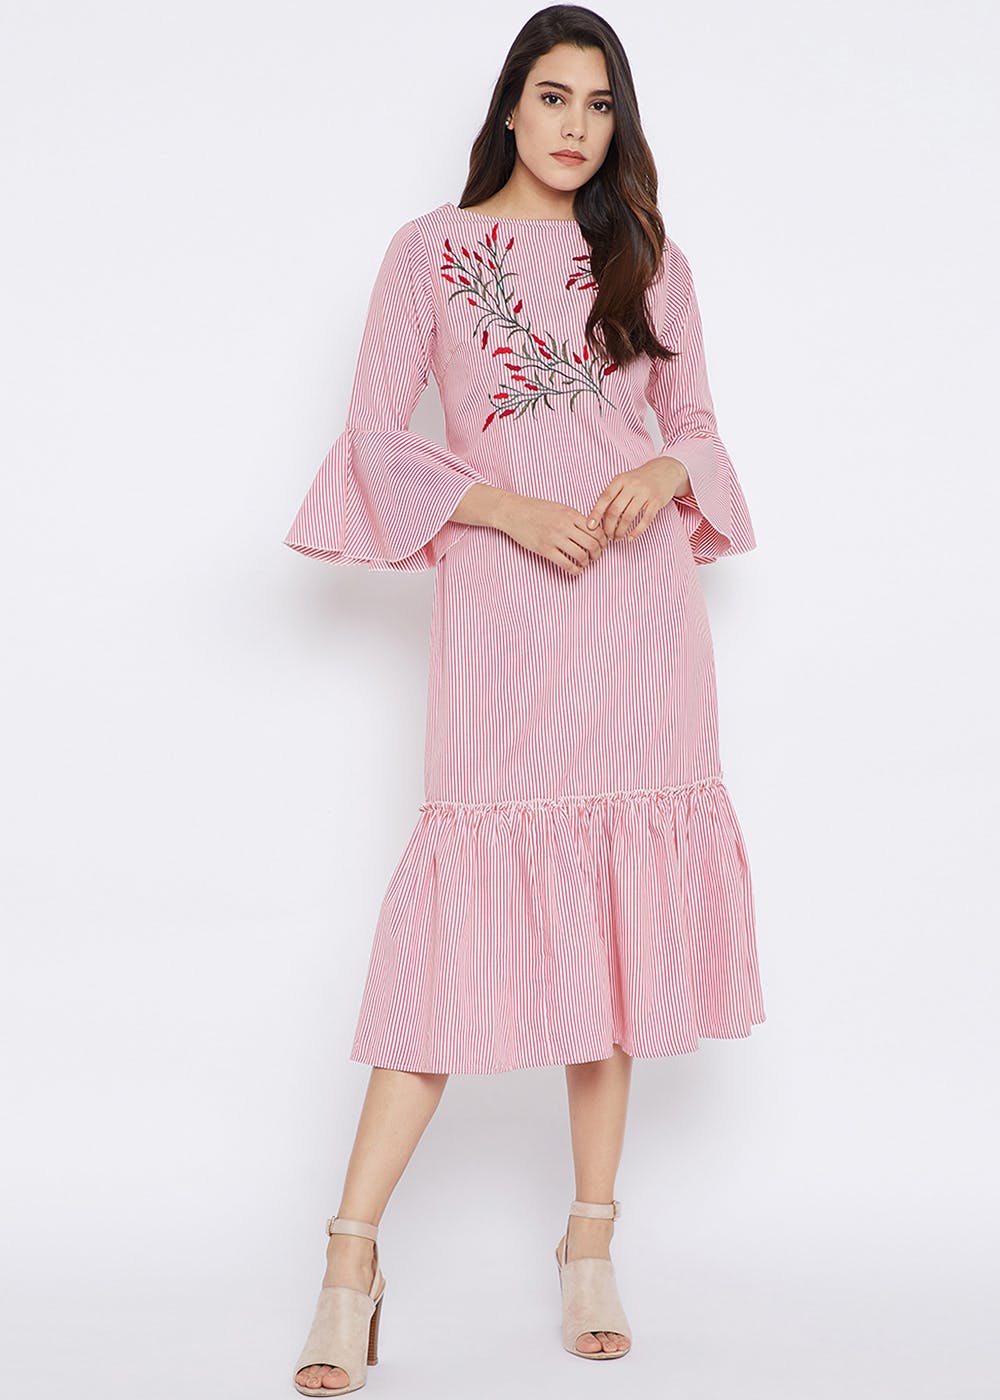 Two-Tone Branched Floral Embroidered Striped Dress - Red